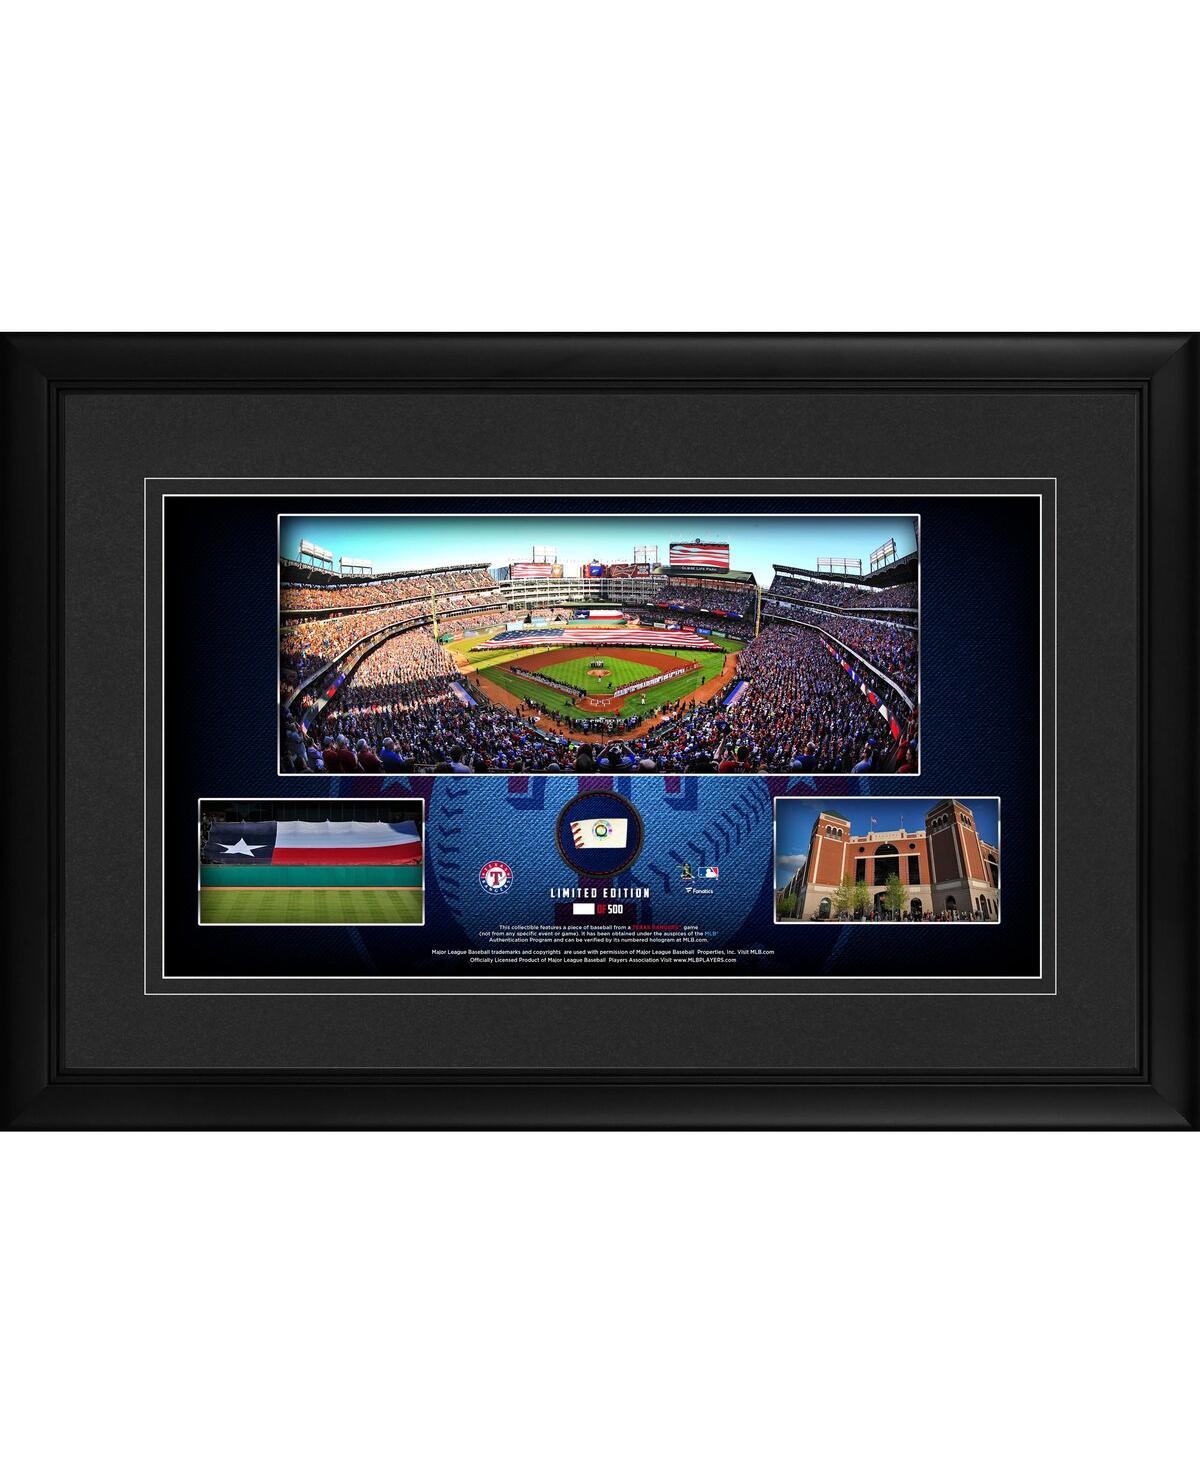 Fanatics Authentic Texas Rangers Framed 10" X 18" Stadium Panoramic Collage With A Piece Of Game-used Baseball In Black